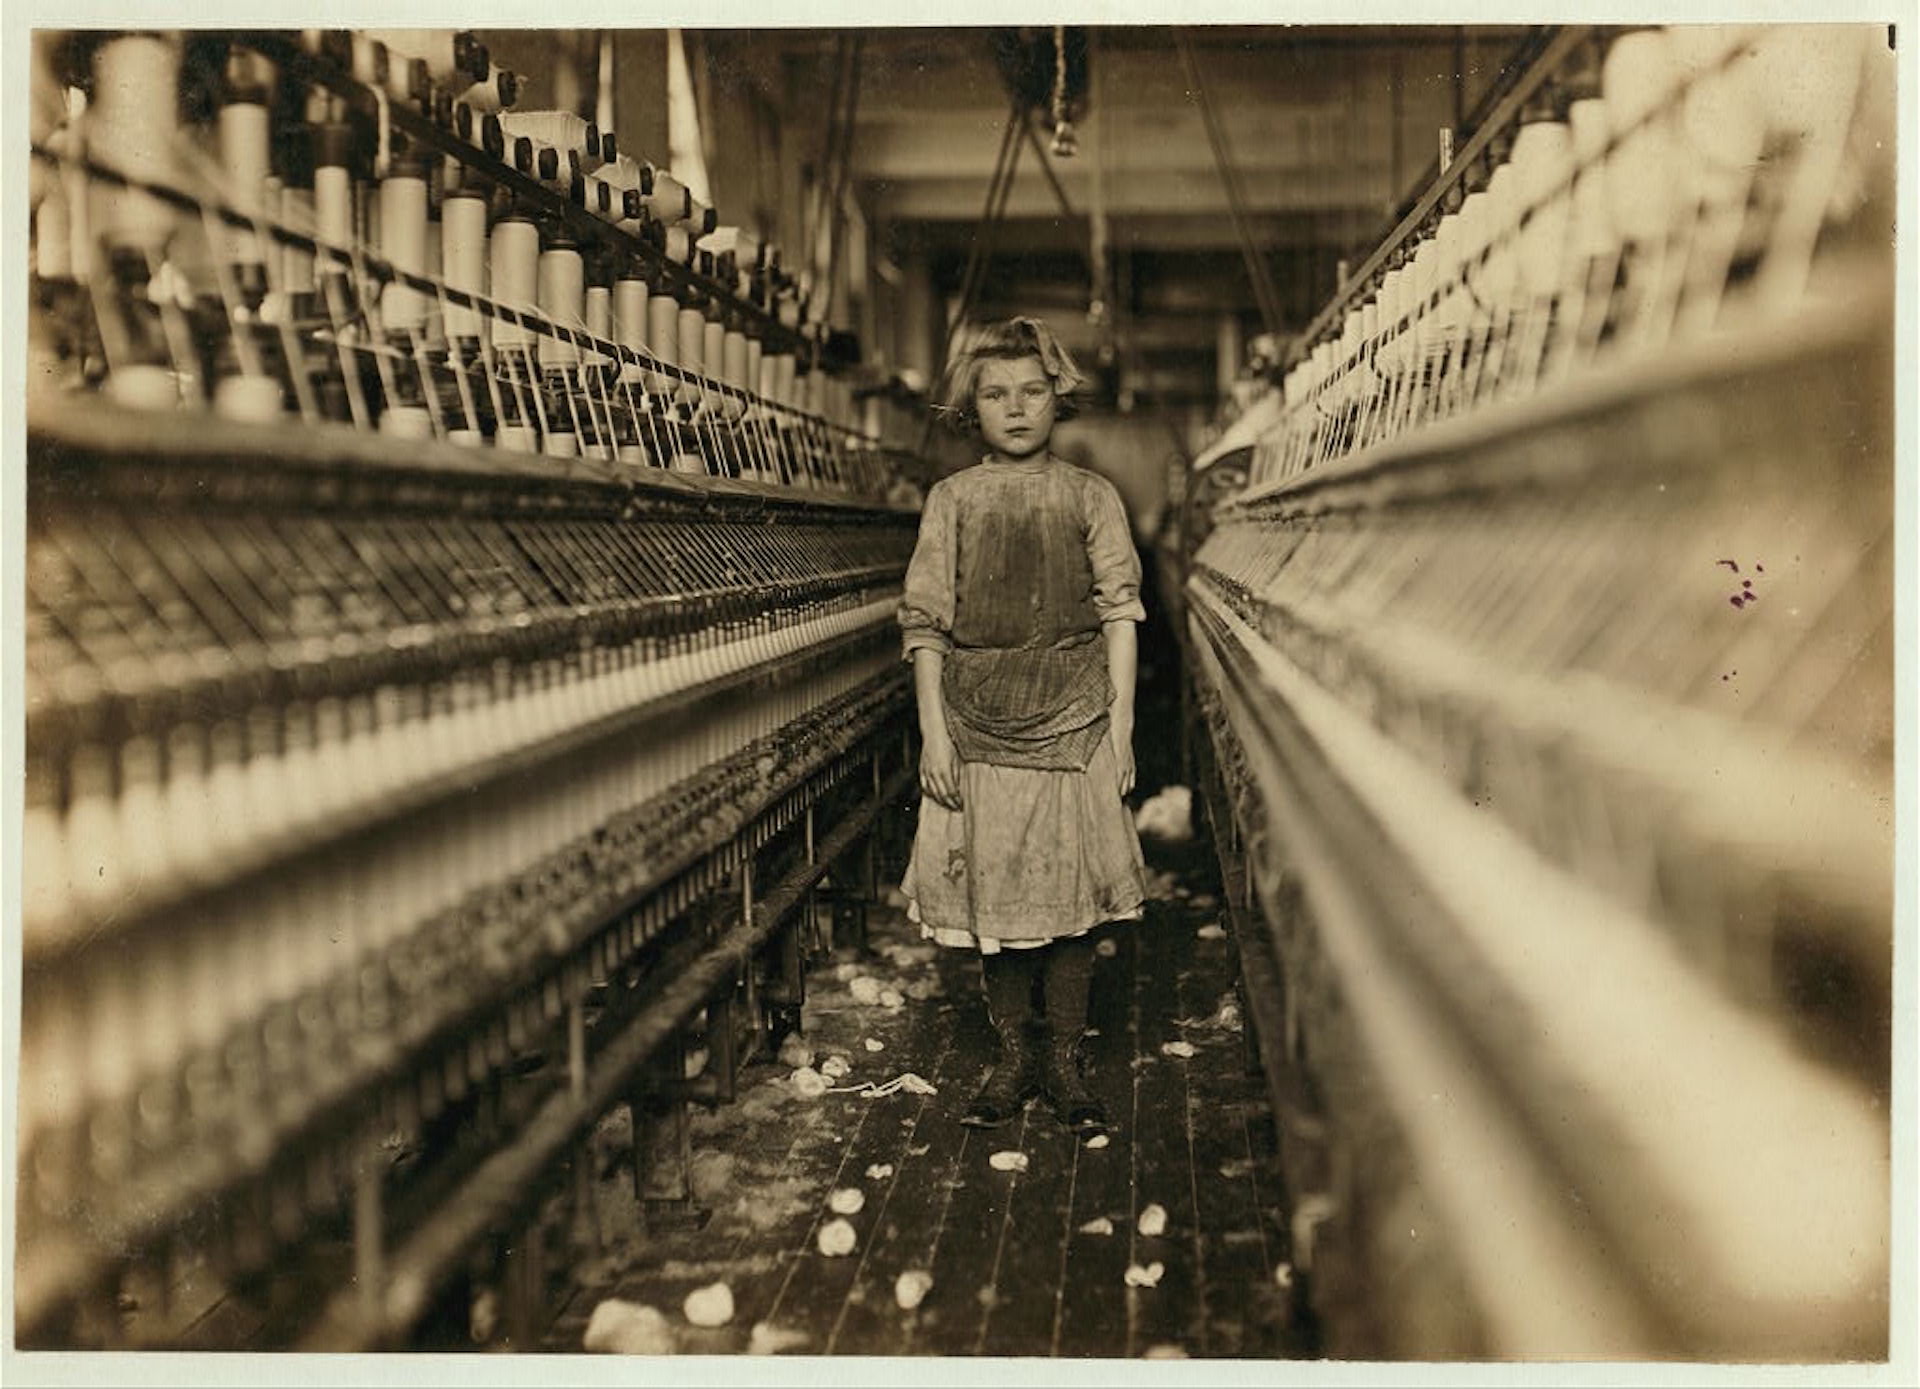 A little spinner in the Globe Cotton Mill in Augusta, Georgia, in 1909. Lewis Hine, Library of Congress Prints & Photographs Division